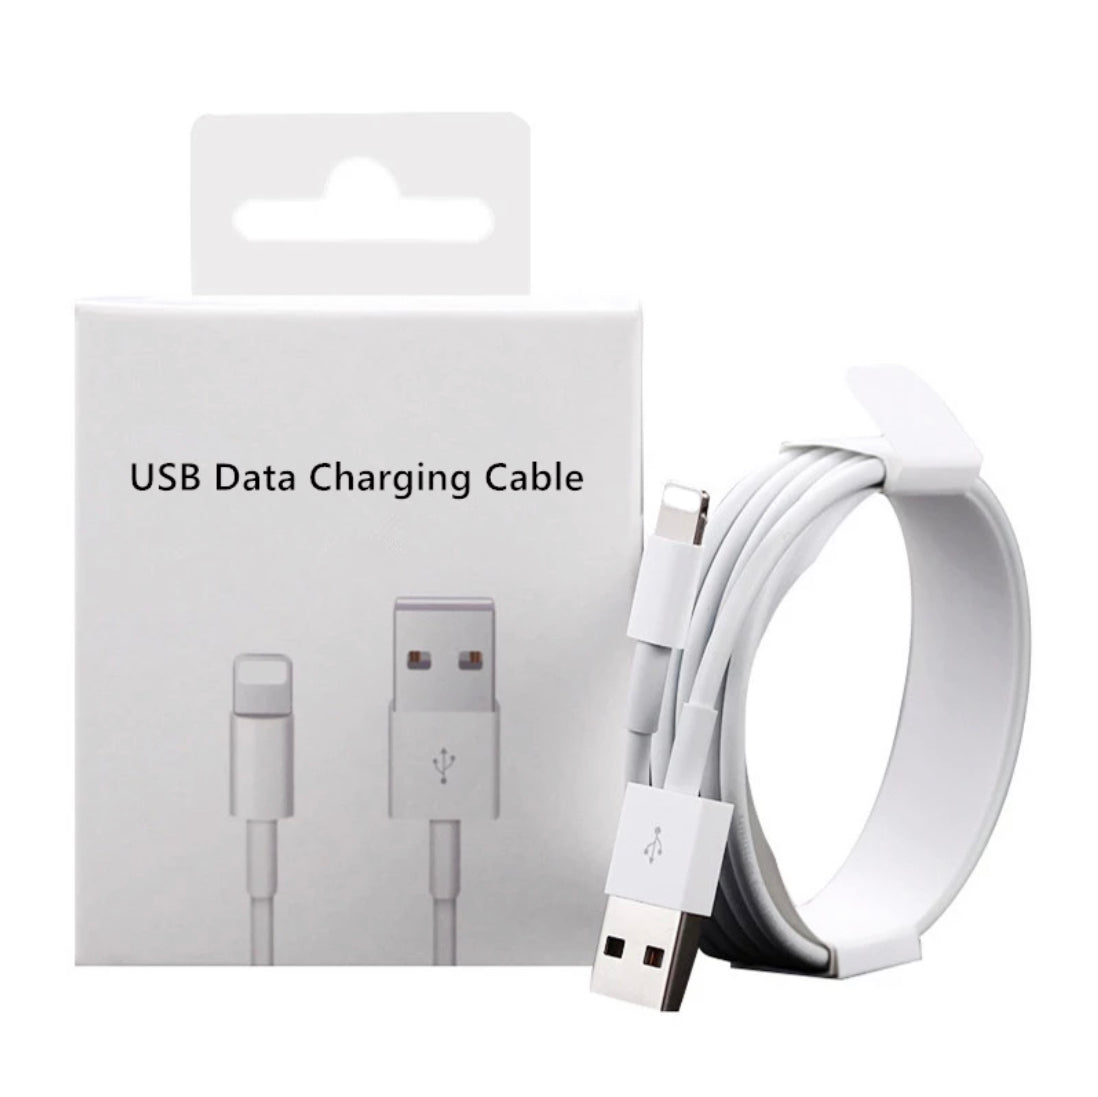 2m Lightning USB charging cable **Buy 1 Get 1**